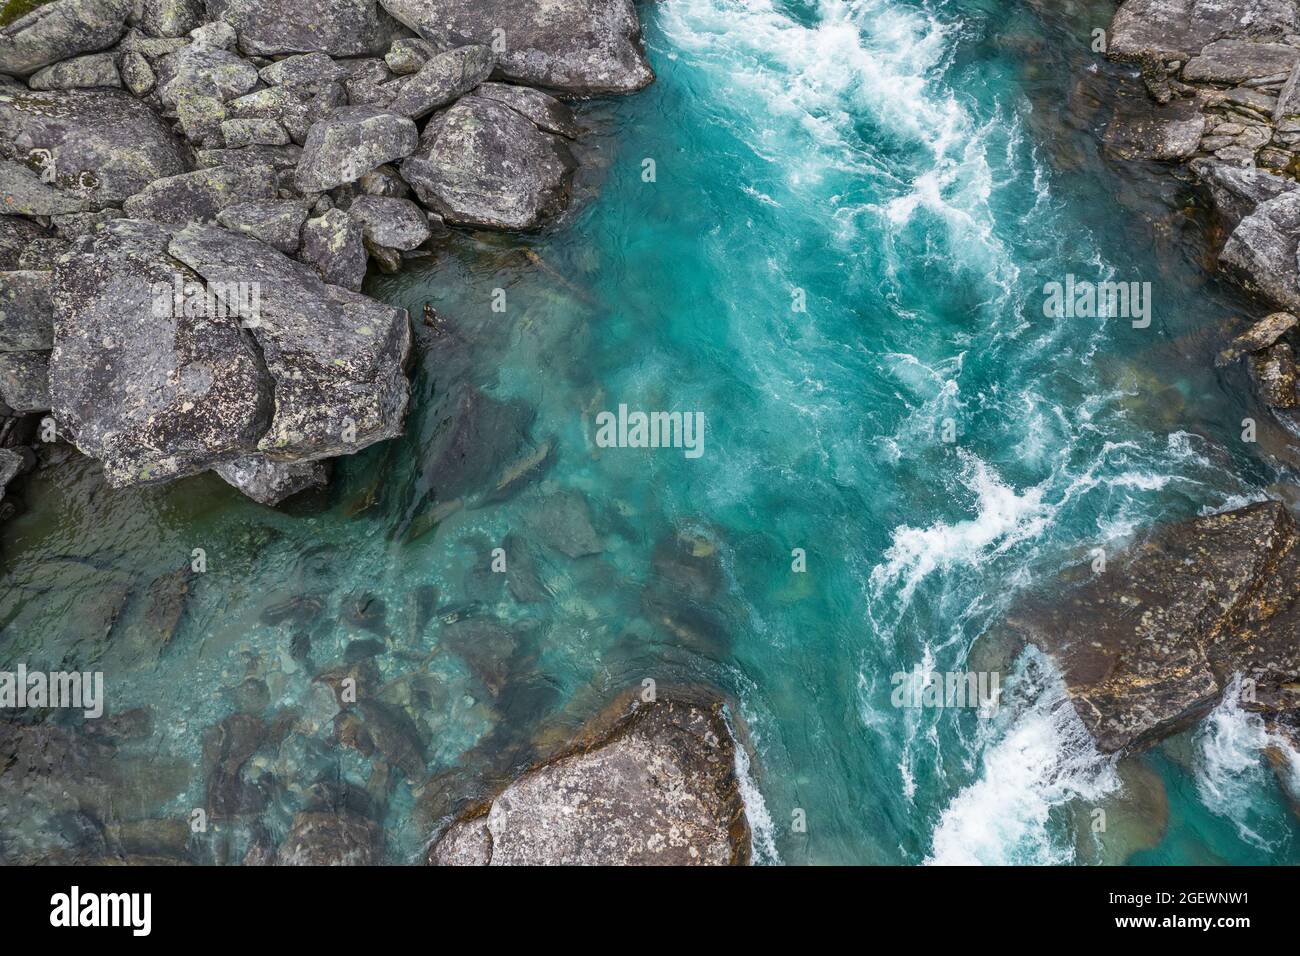 Crystal Clean Wilderness Turquoise River Fly Fishing Aerial Vista. Norwegian Vestland County. Stock Photo